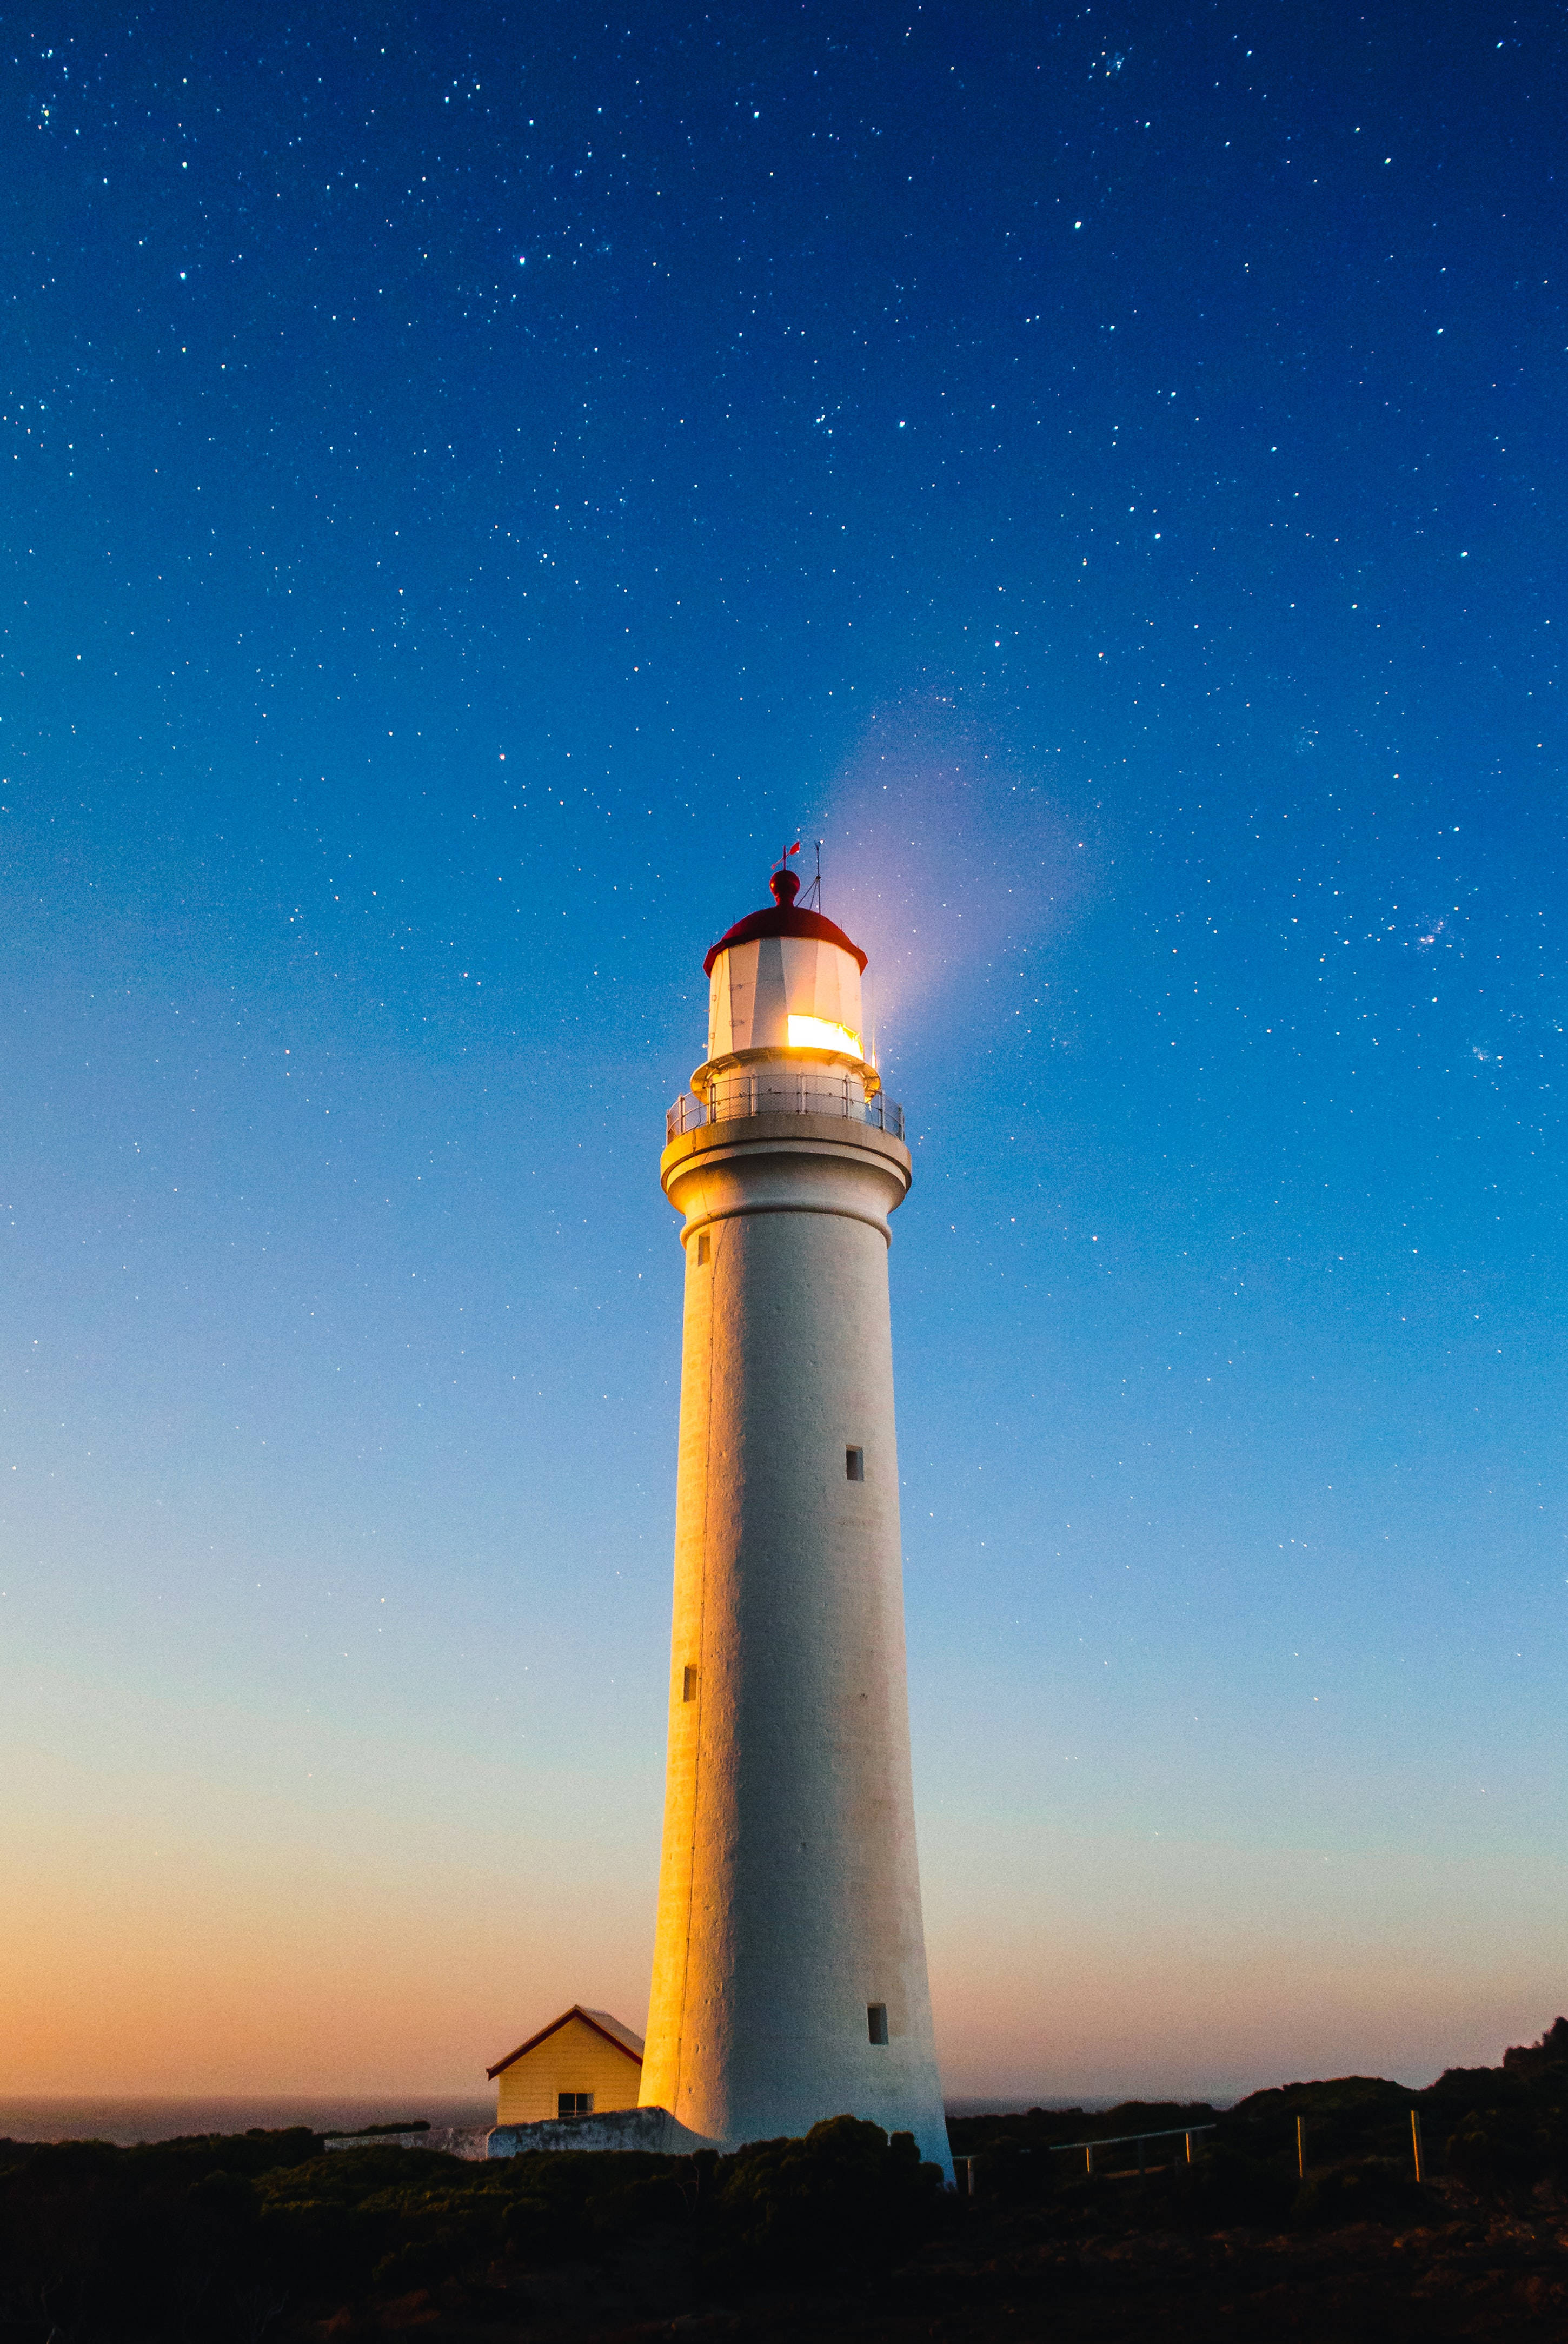 Mesmerizing 4k Ultra Hd Phone Wallpaper Of A Lighthouse Under The Blue Sky Background